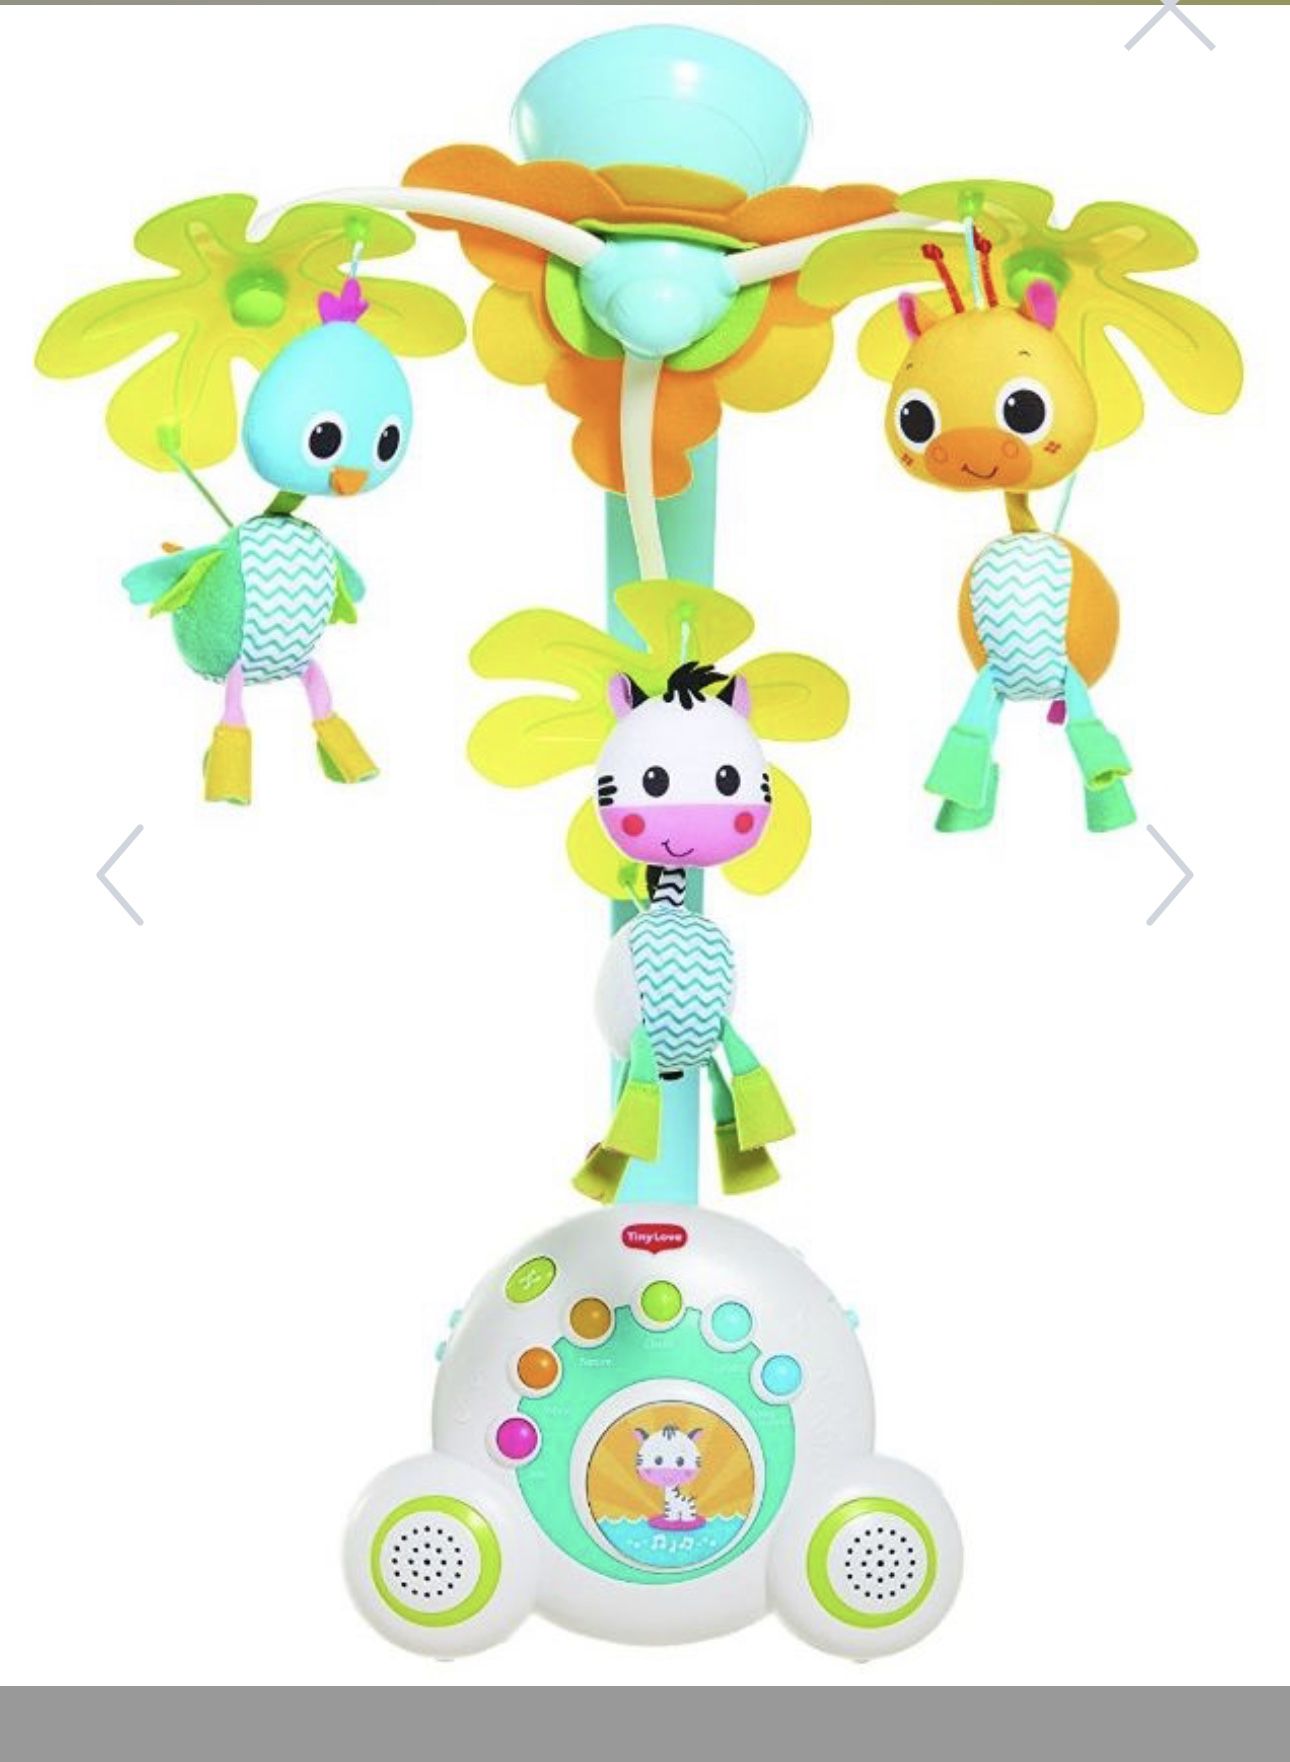 Tiny Love Soothe & Groove Mobile - Safari, Baby Toys, Music In Crib,  $19.99 First Come First Serve. 